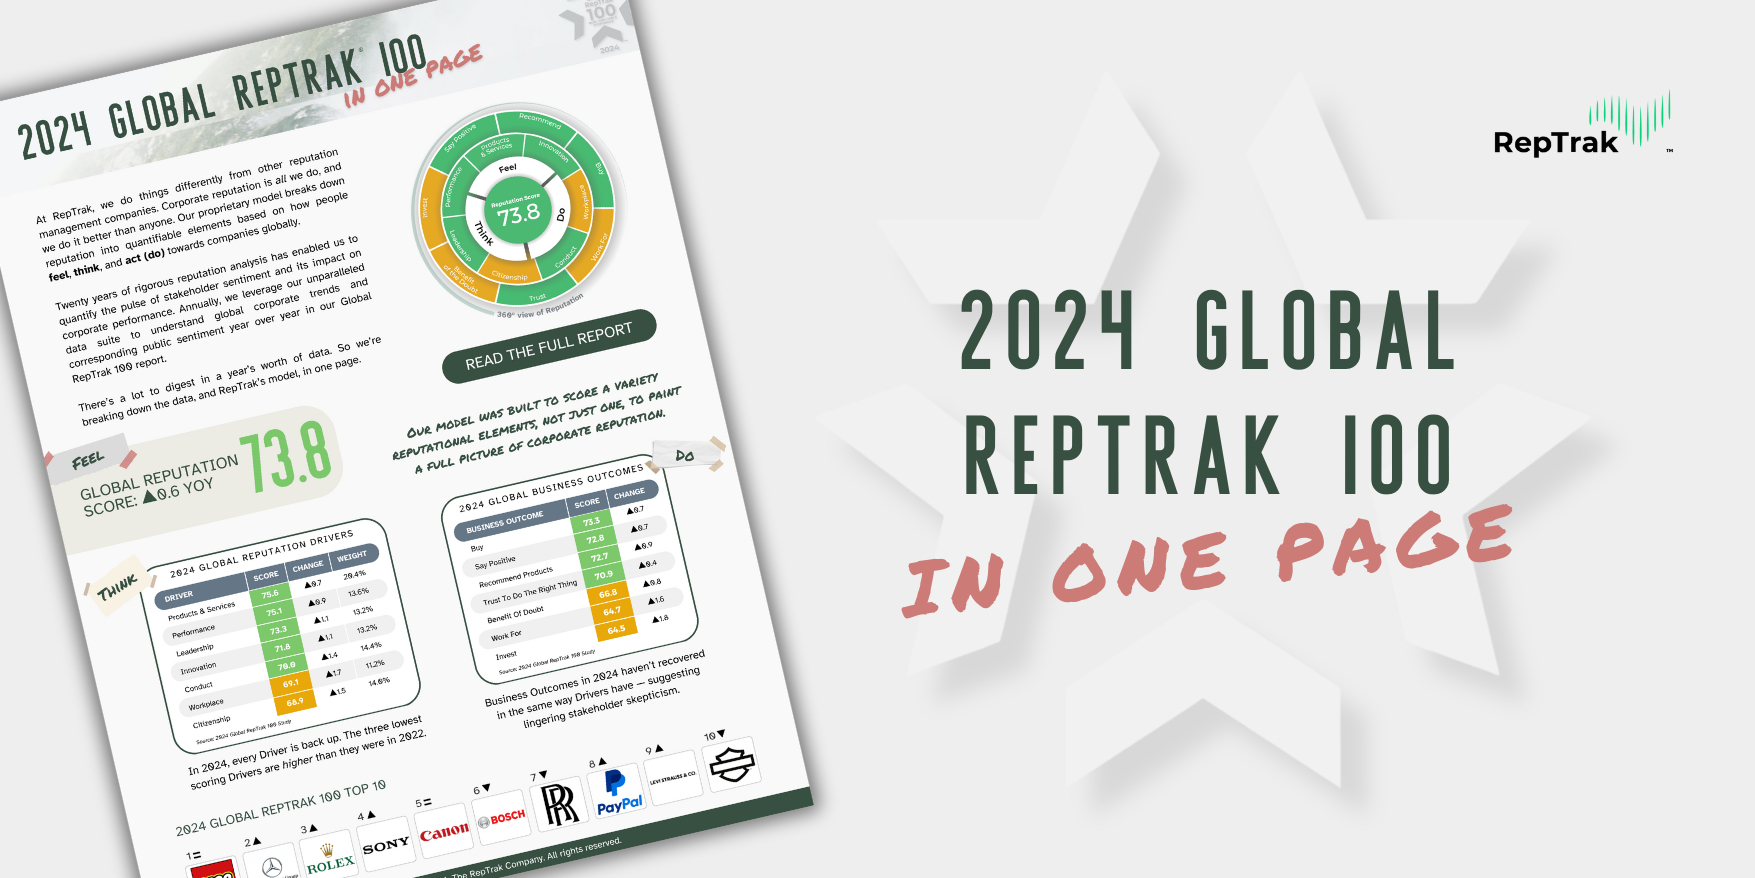 2024 Global RepTrak 100 one-pager